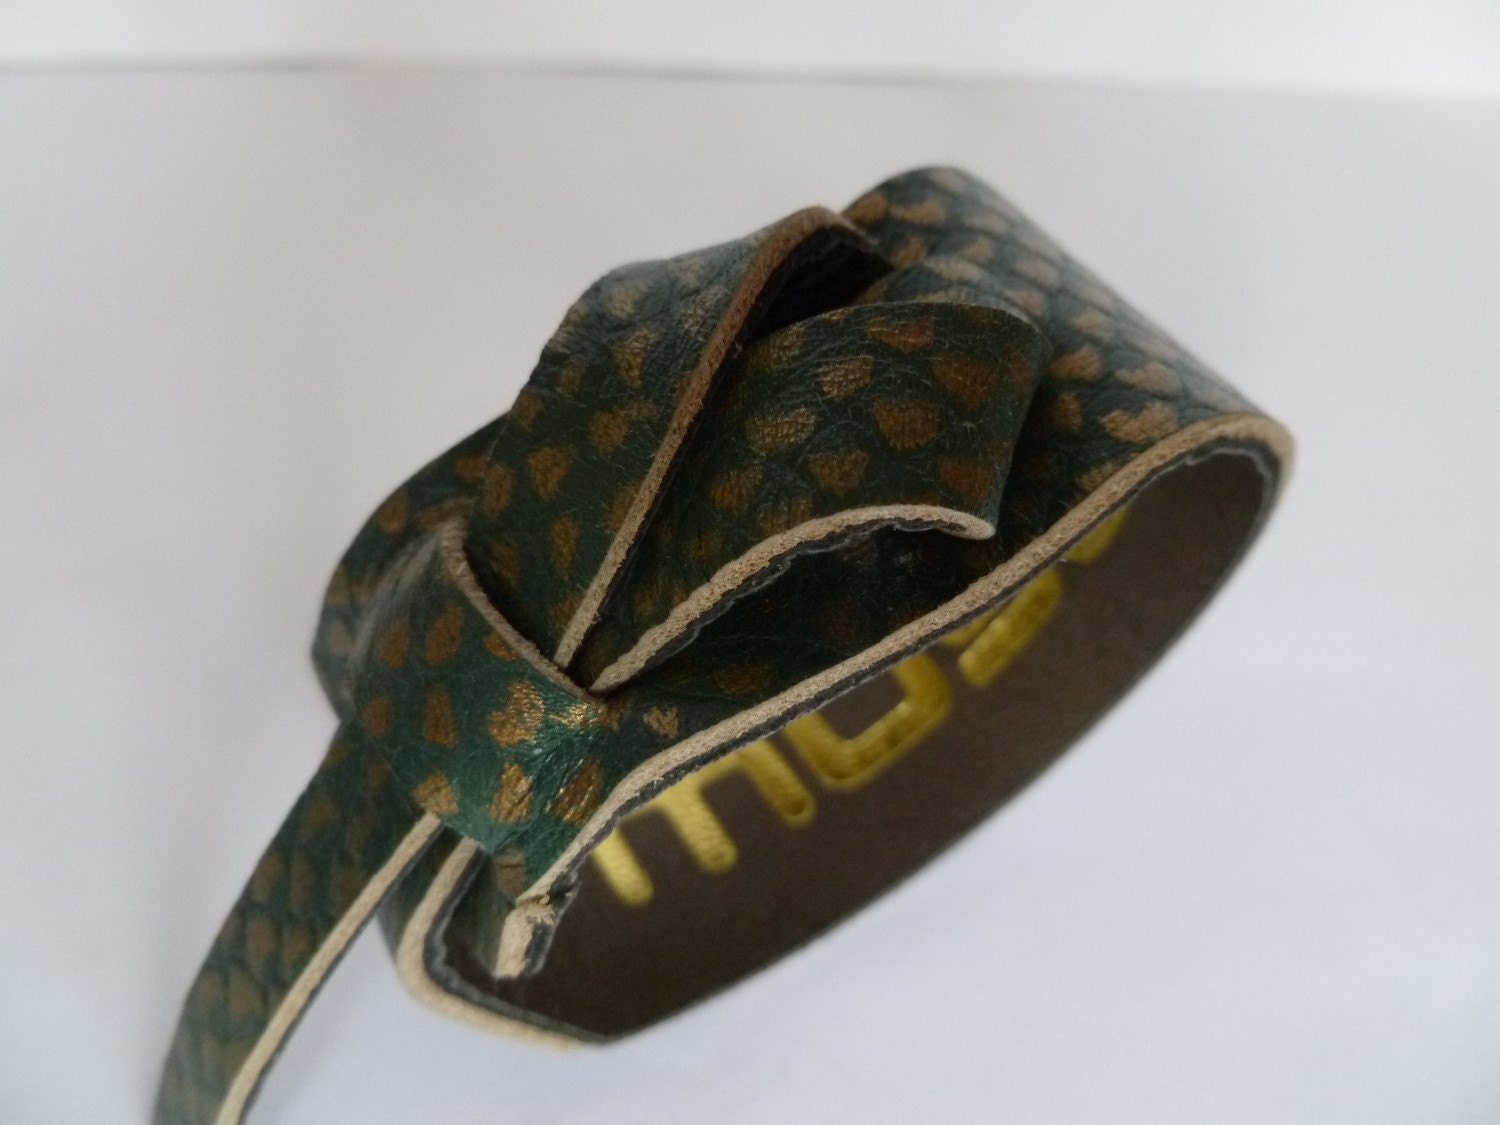 Gold and Green Leather Cuff Bracelet by MuseBelts on Etsy polo retro